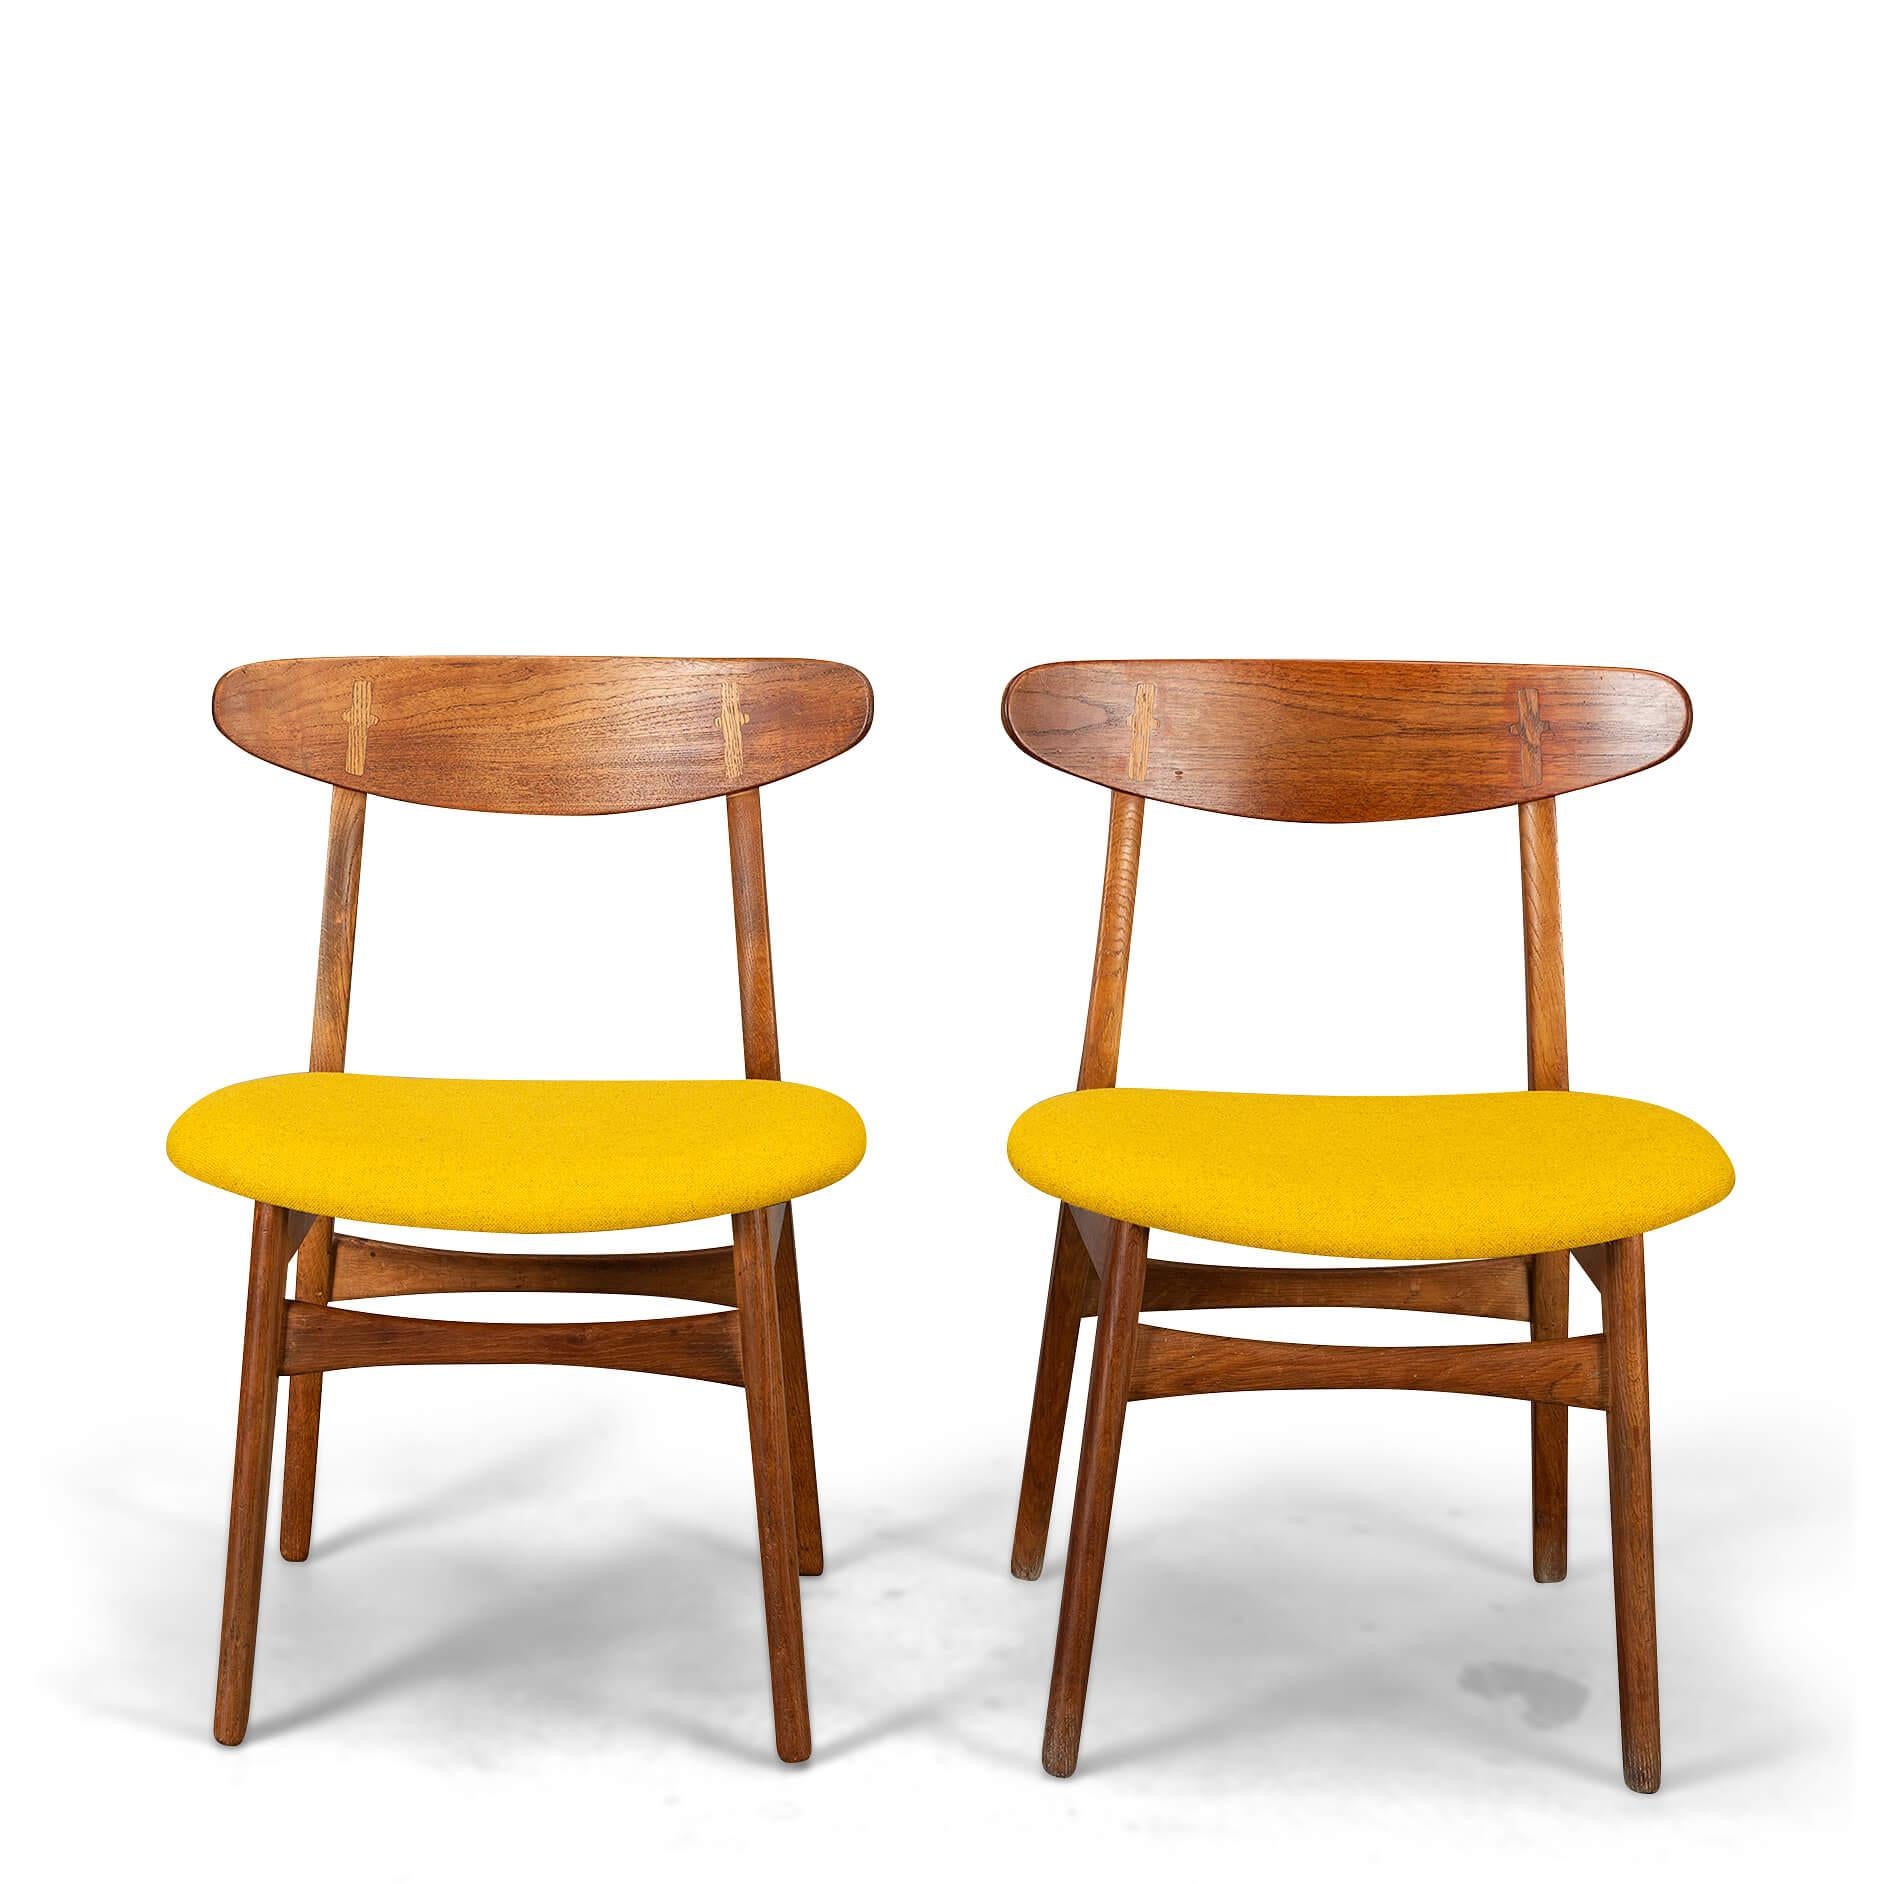 Mid-20th Century Reupholstered Chair #CH30 by Hans J. Wegner for Carl Hansen & Son, Set of 2 For Sale